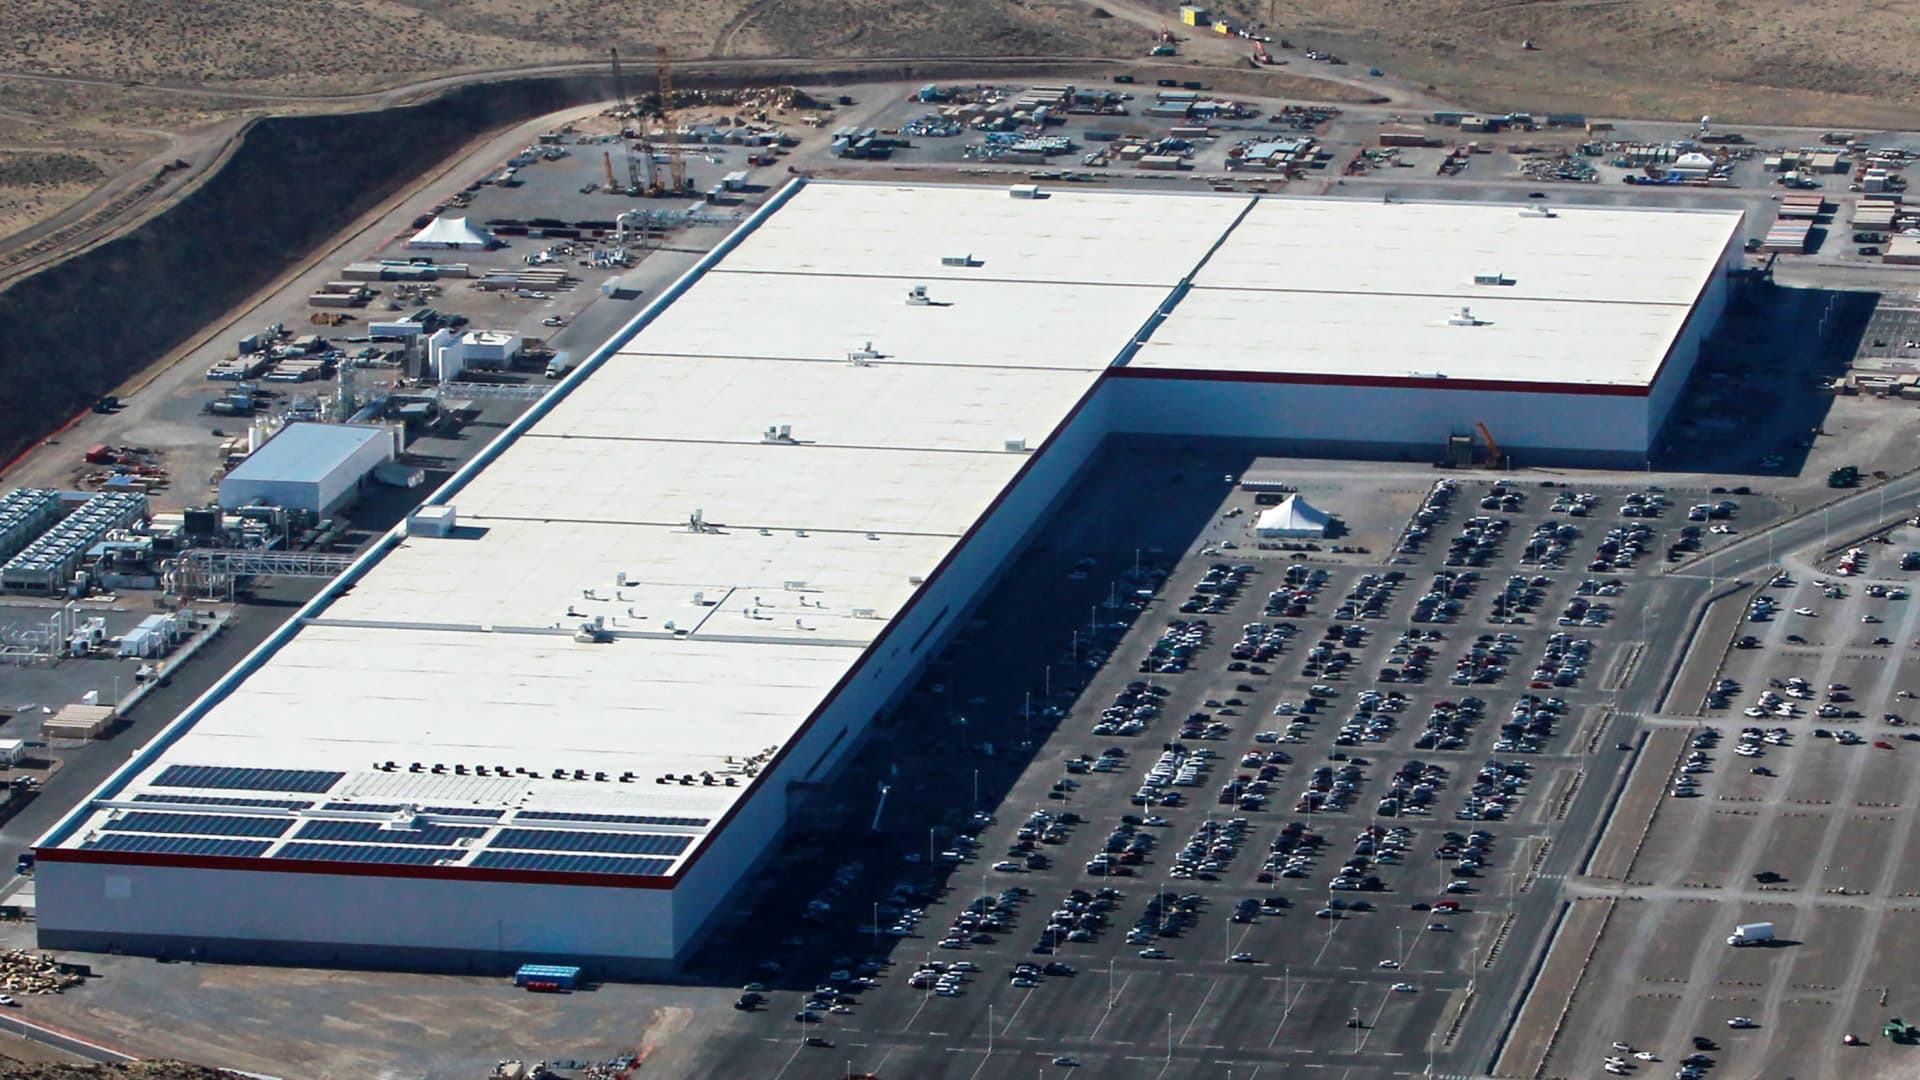 Tesla plans to spend $3.6 billion more on manufacturing in Nevada